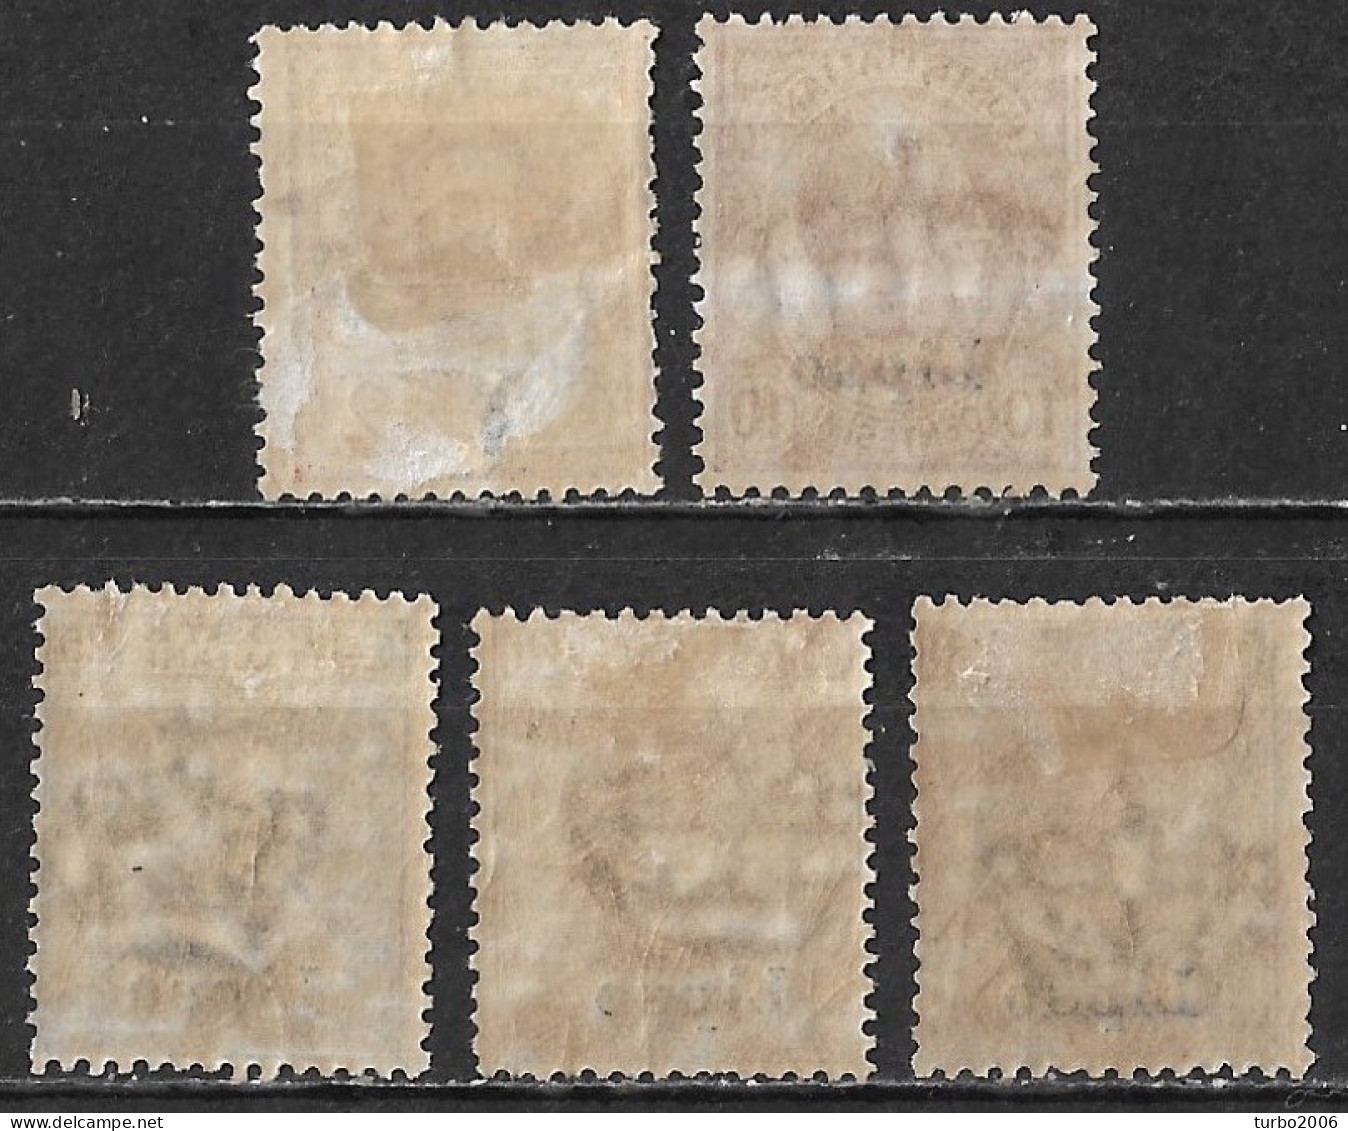 DODECANESE 1912 Italian Stamps With Black Overprint LIPSO 5 Values From The Set Vl. 1-3-5/7 MH - Dodecanese